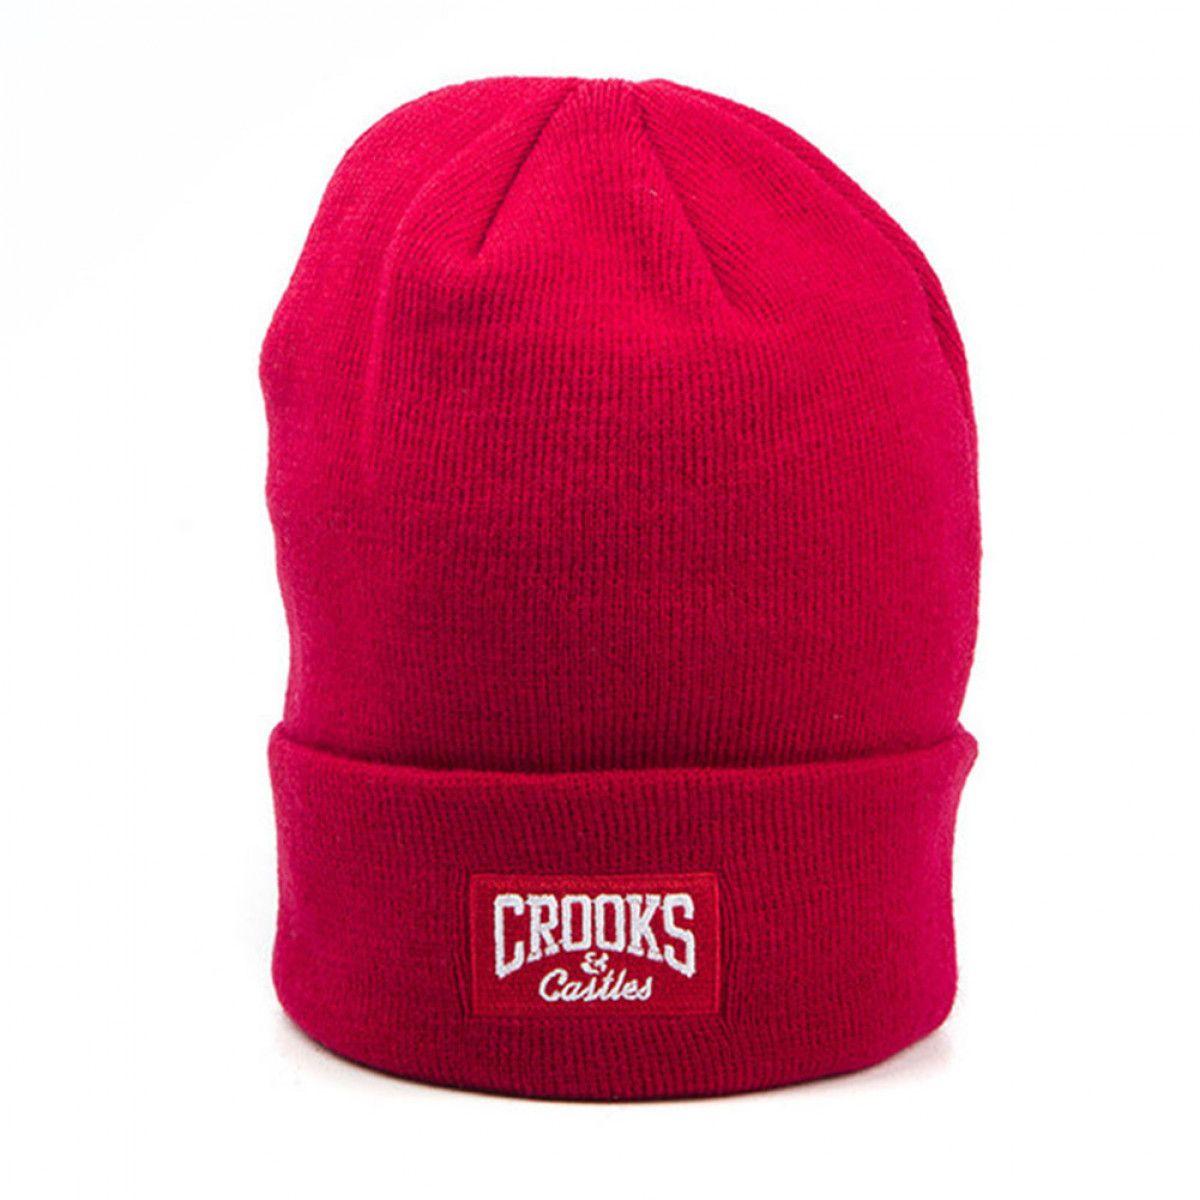 Crooks and Castles Red Logo - CROOKS & CASTLES CORE LOGO KNIT BEANIE - RED - English